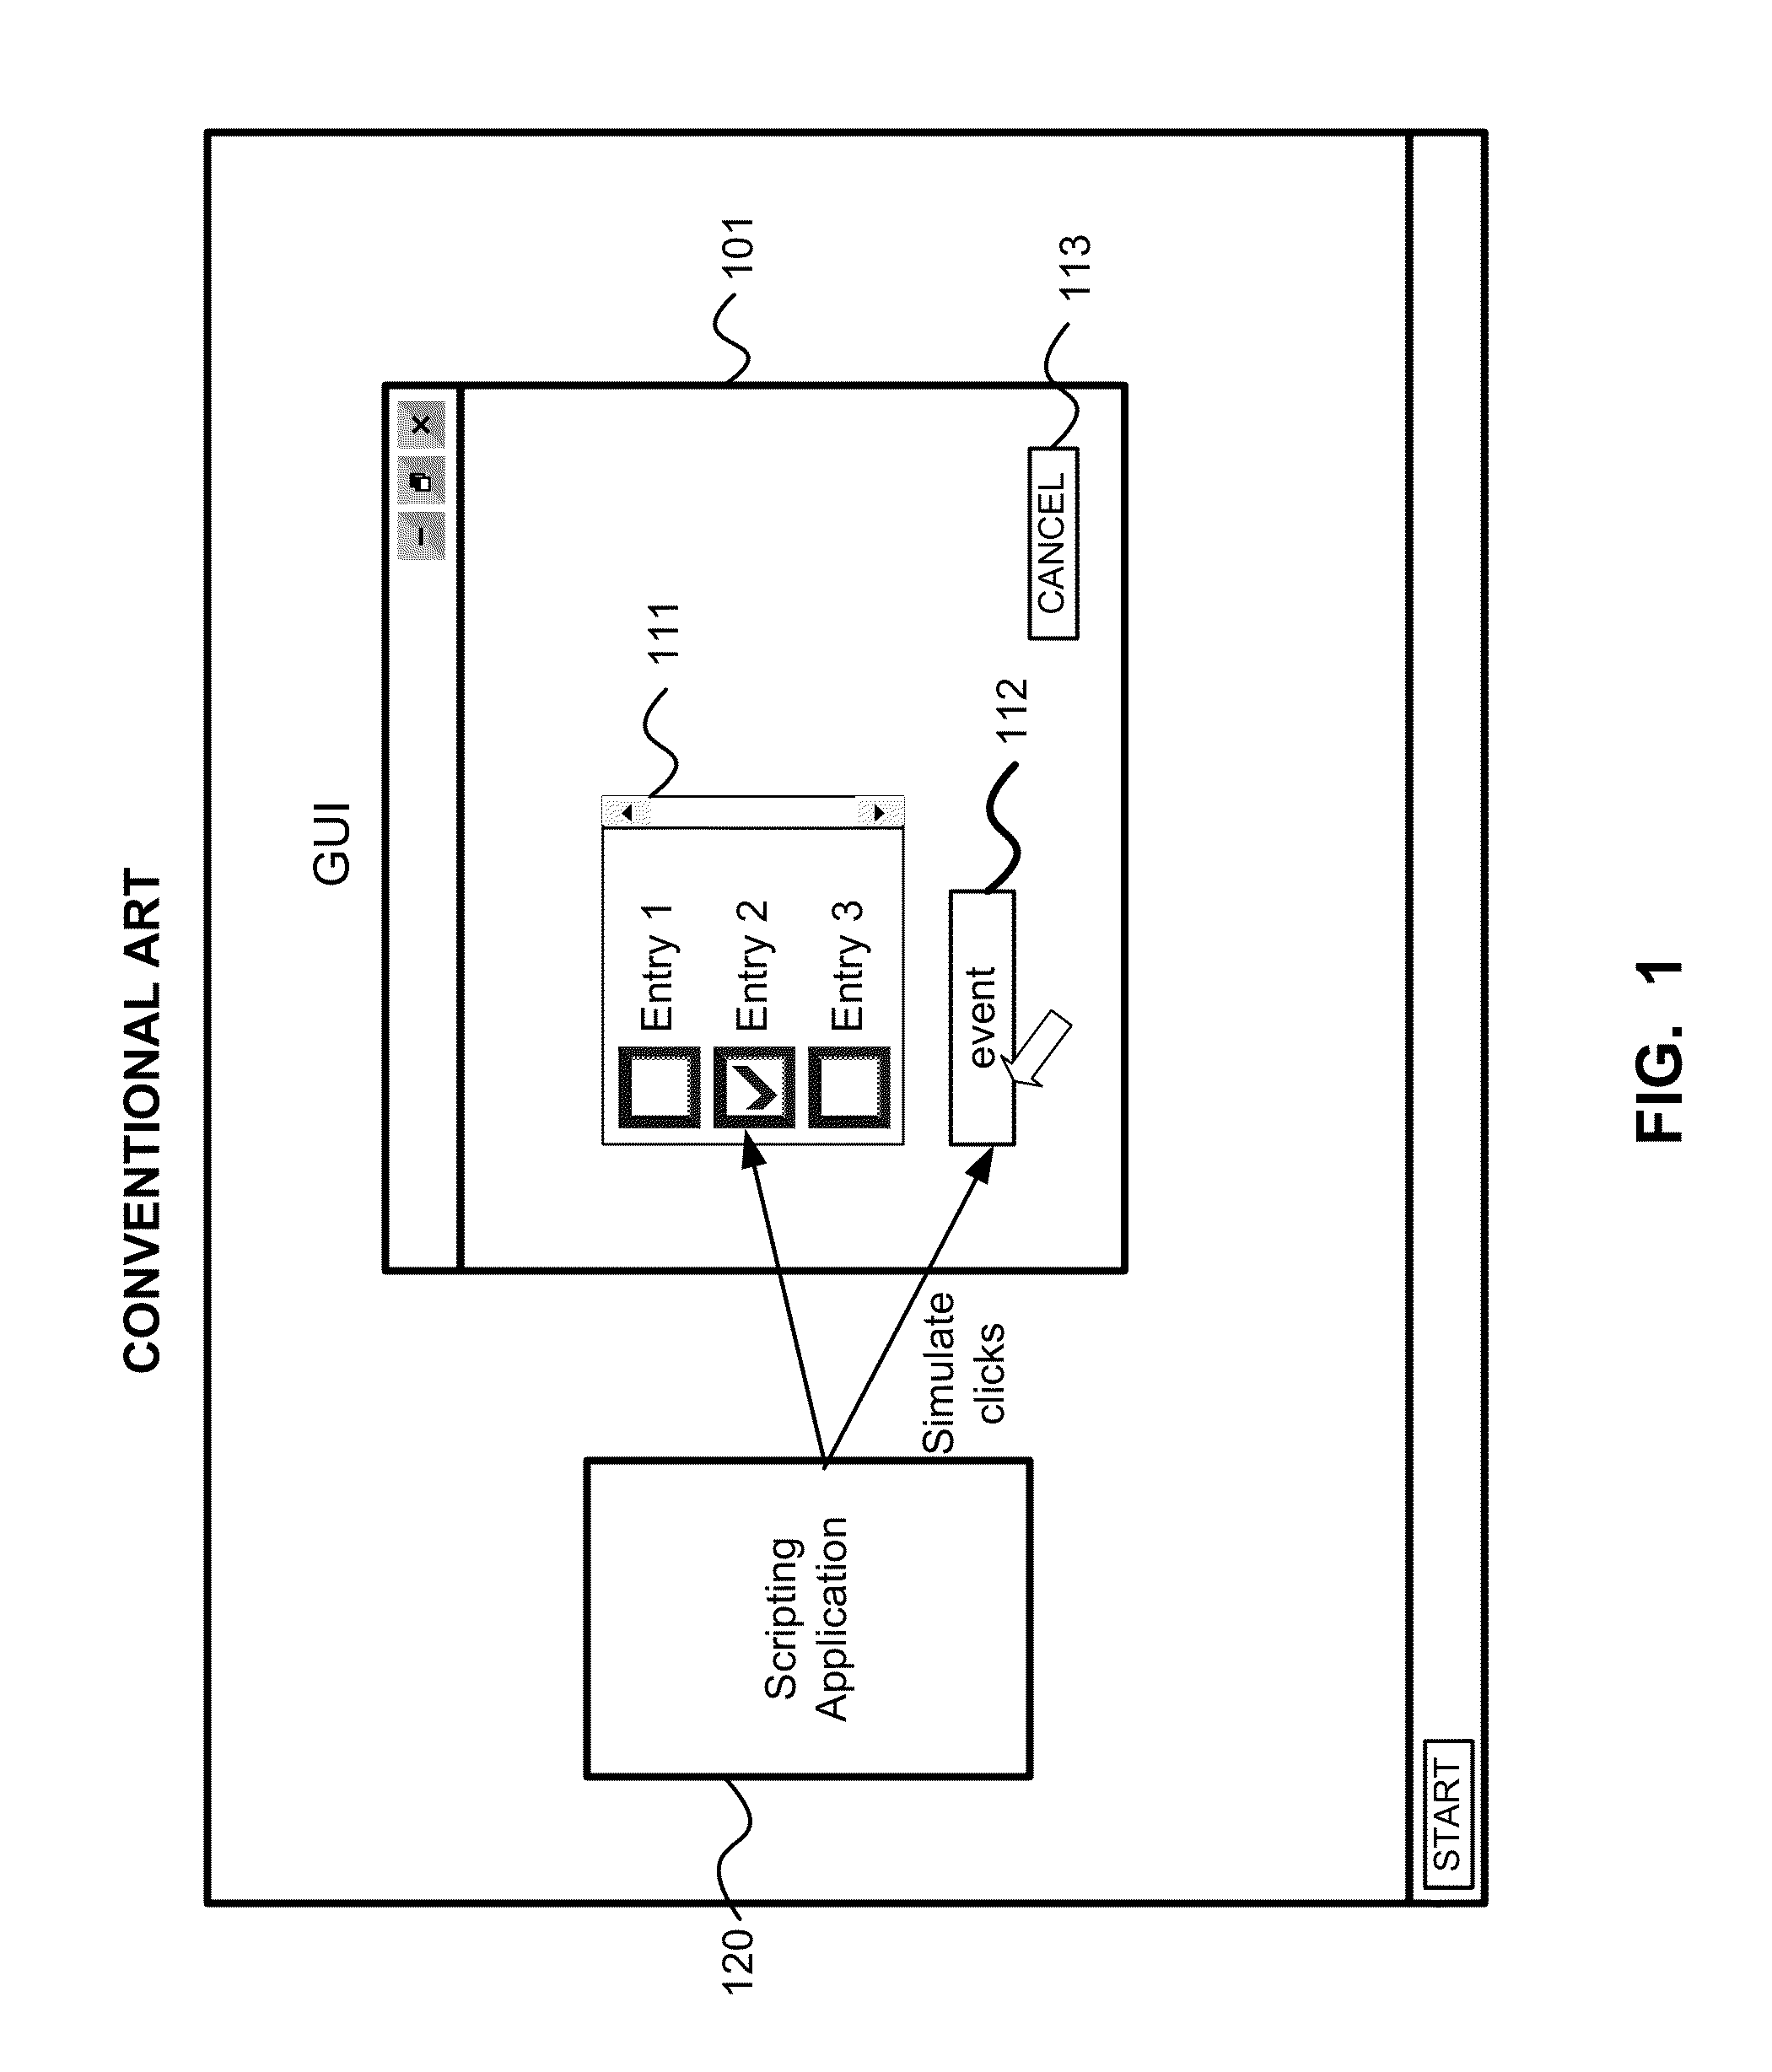 Method and system for unattended installation of guest operating system